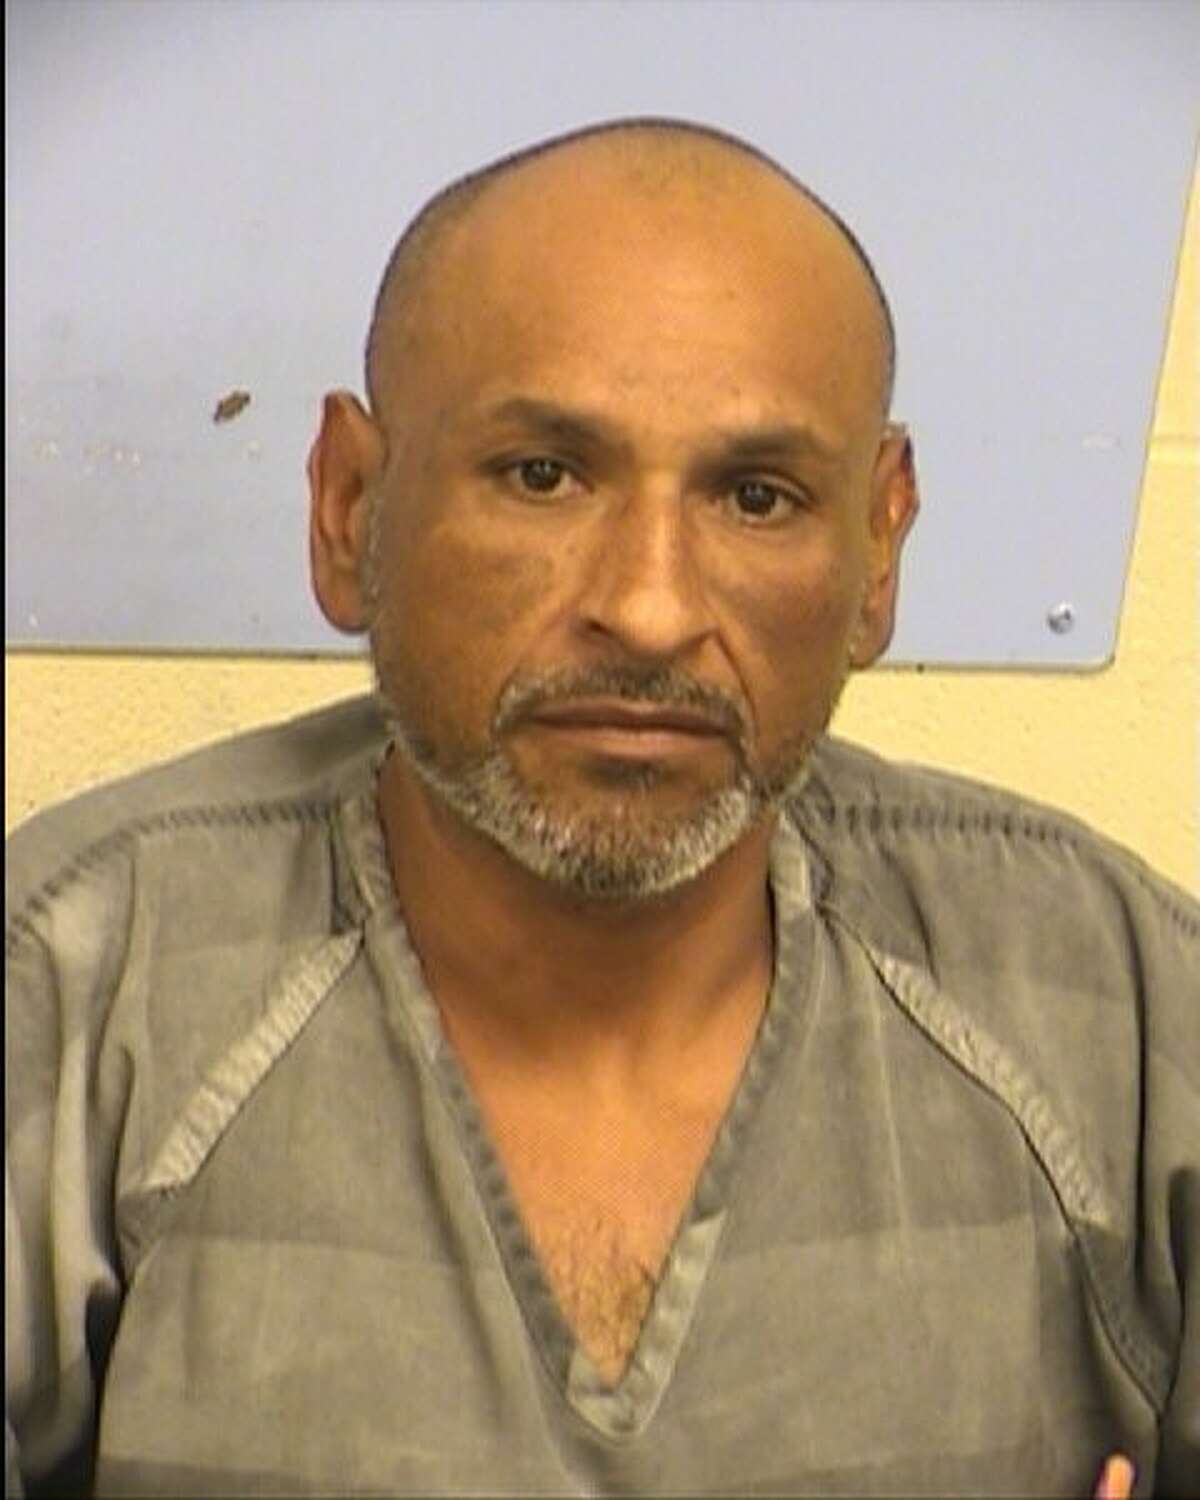 The Austin Police Department said they discovered $4.8 million worth of drugs in the tire casings of Armando Martinez, 43.